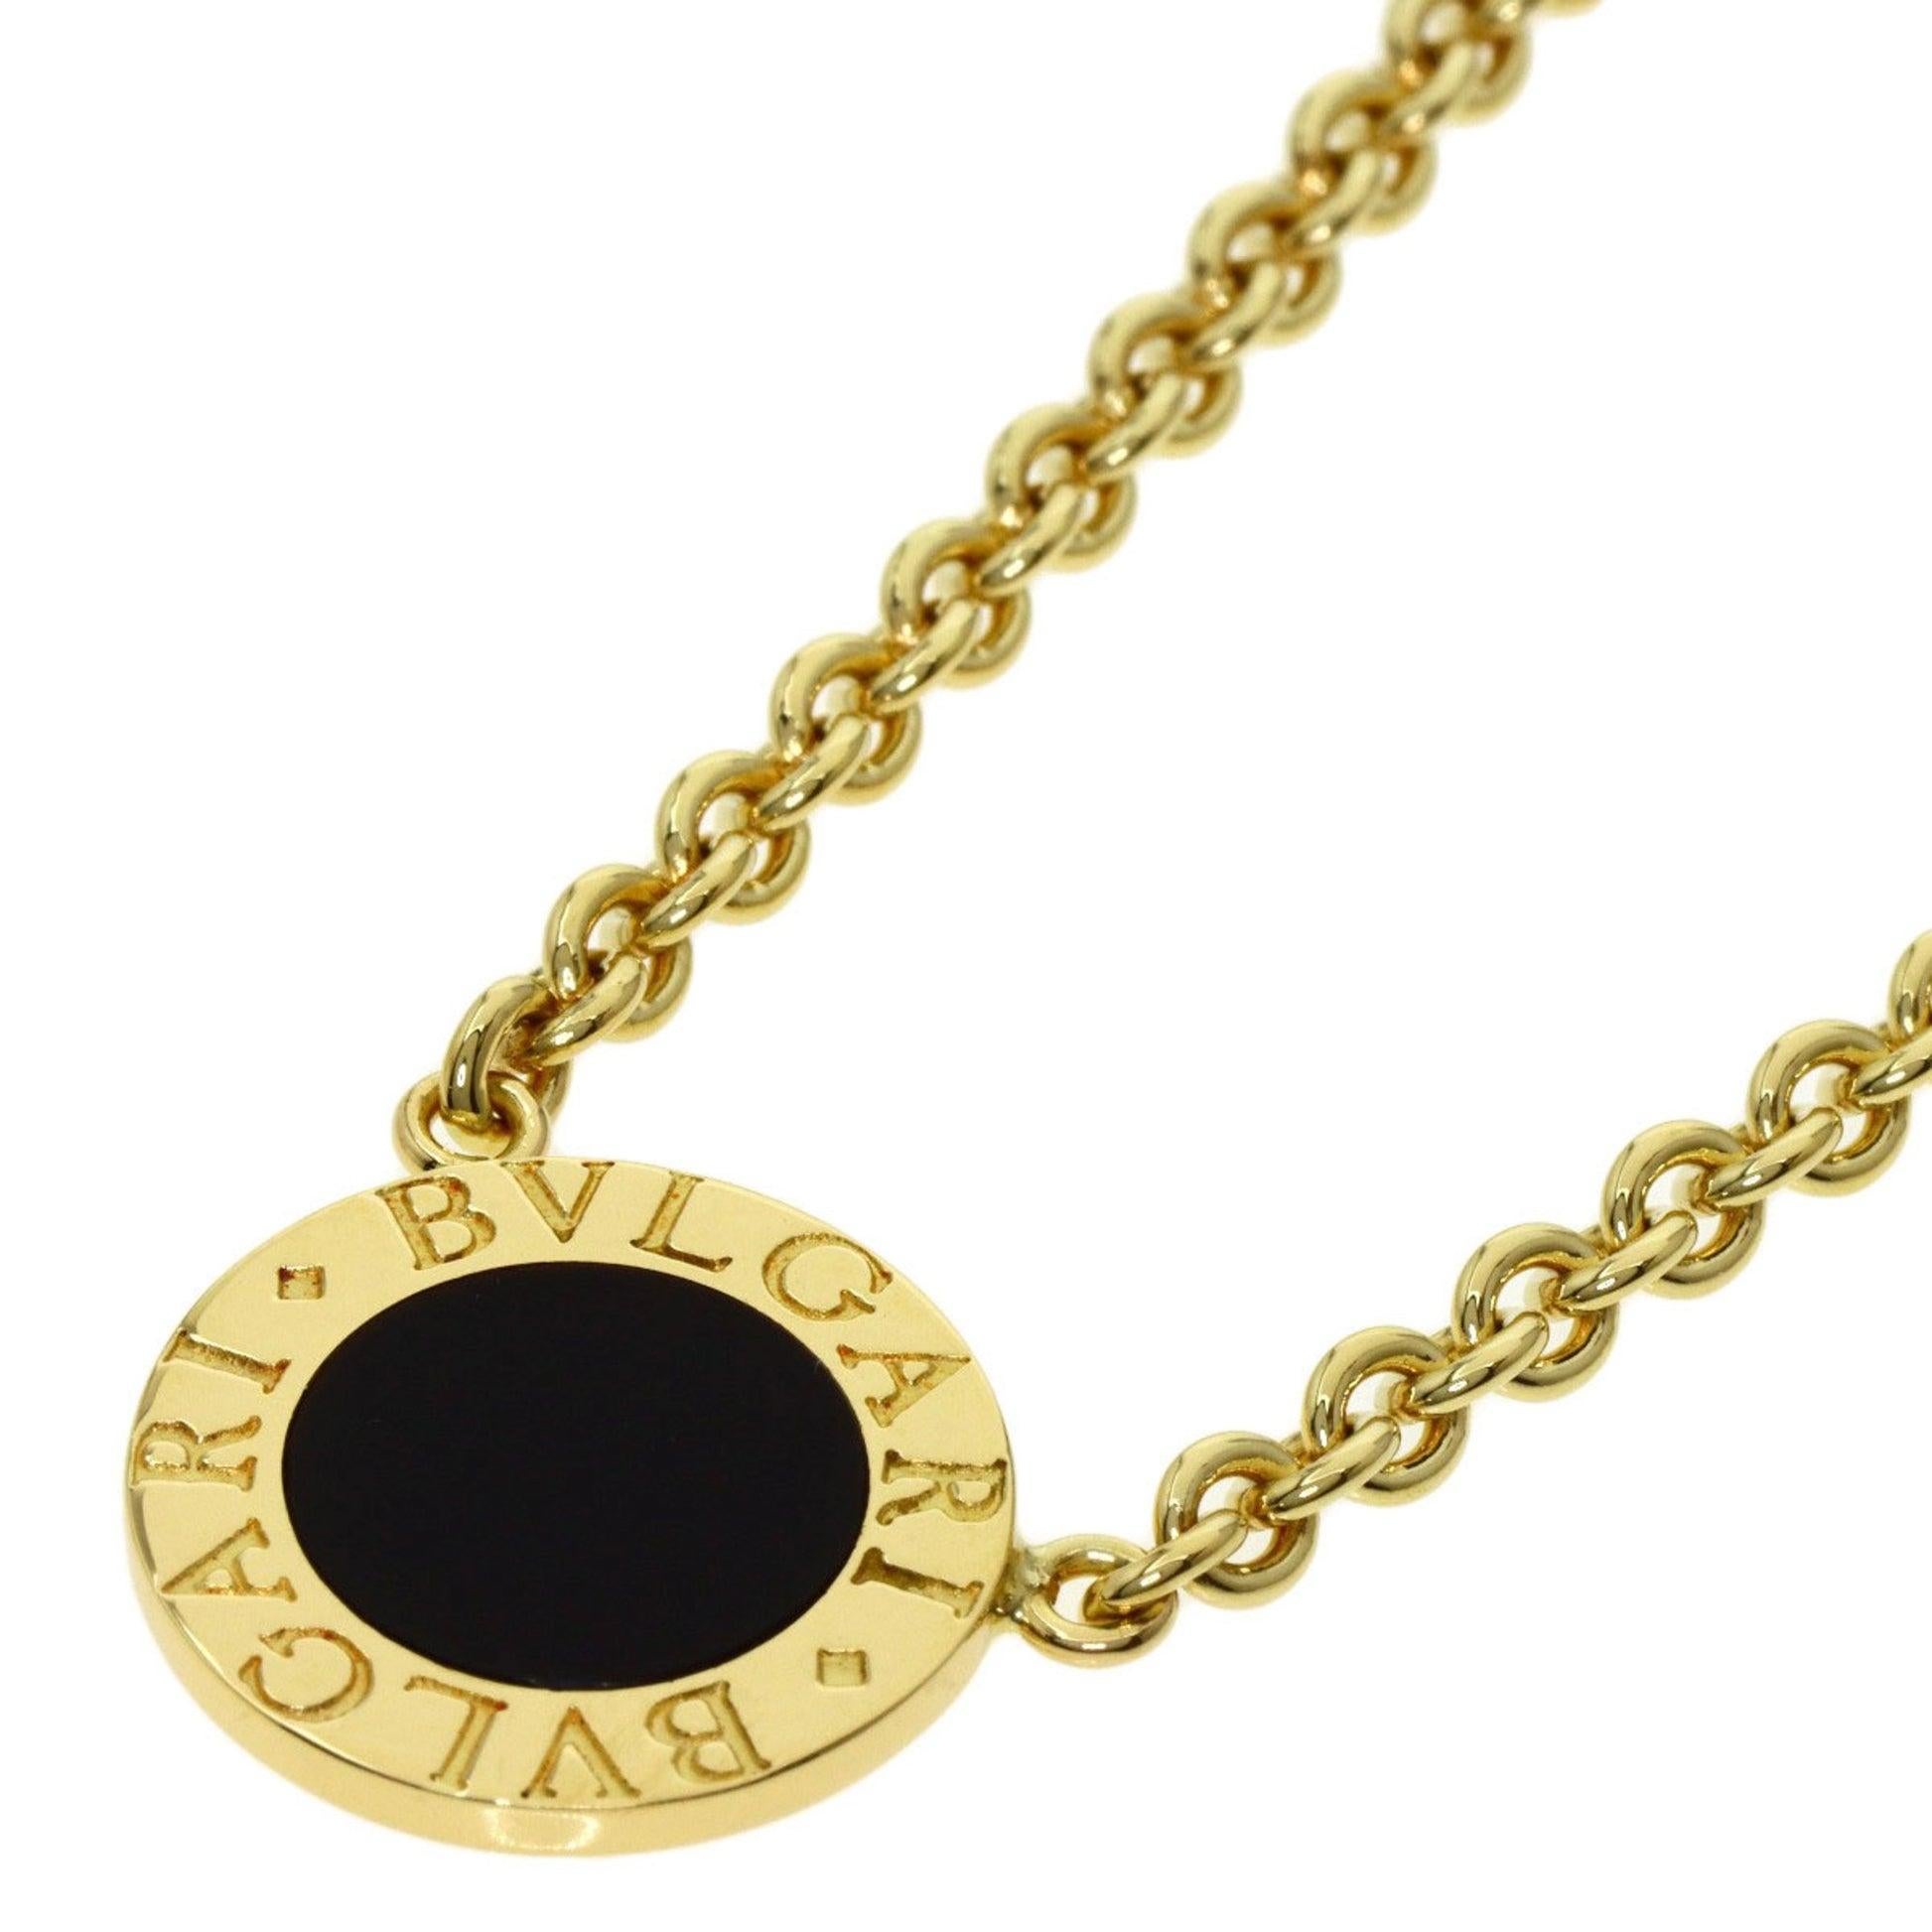 Bvlgari Onyx Necklace in 18K Yellow Gold

Additional Information:
Brand: Bvlgari
Gender: Women
Line: Bvlgari Bvlgari
Gemstone: Onyx
Material: Yellow gold (18K)
Condition: Good
Condition details: The item has been used and has some minor flaws.